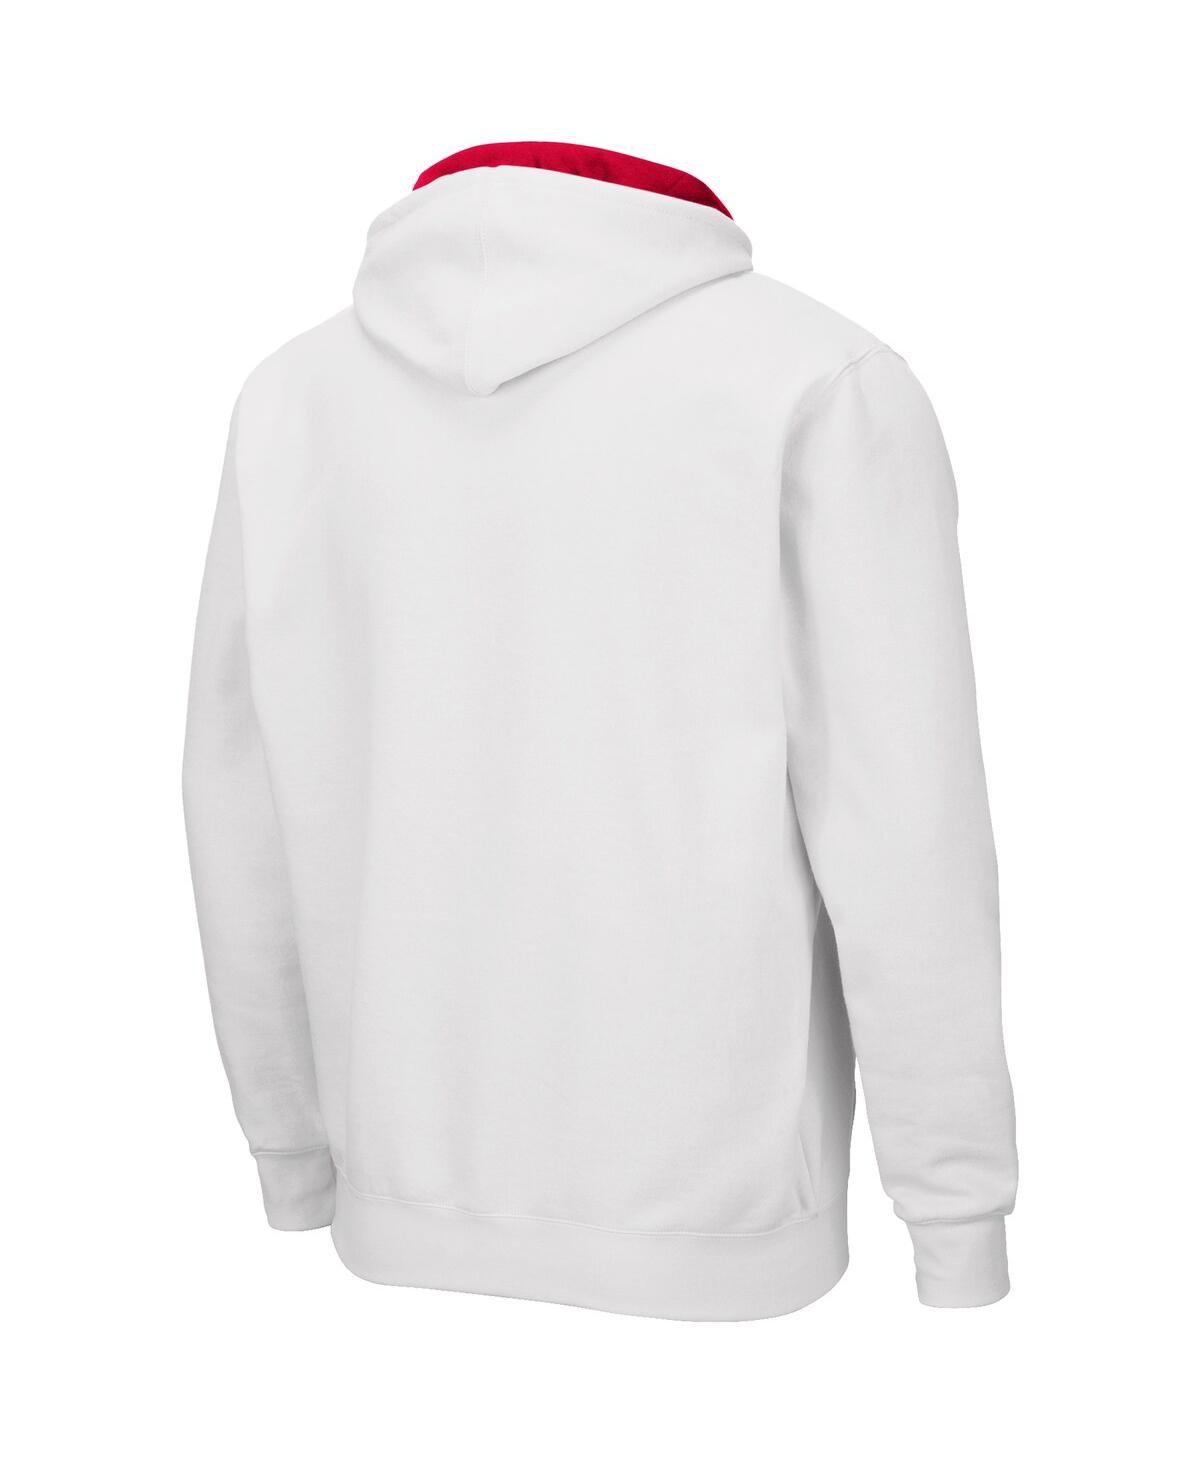 Shop Colosseum Men's  White Ohio State Buckeyes Arch And Logo 3.0 Full-zip Hoodie